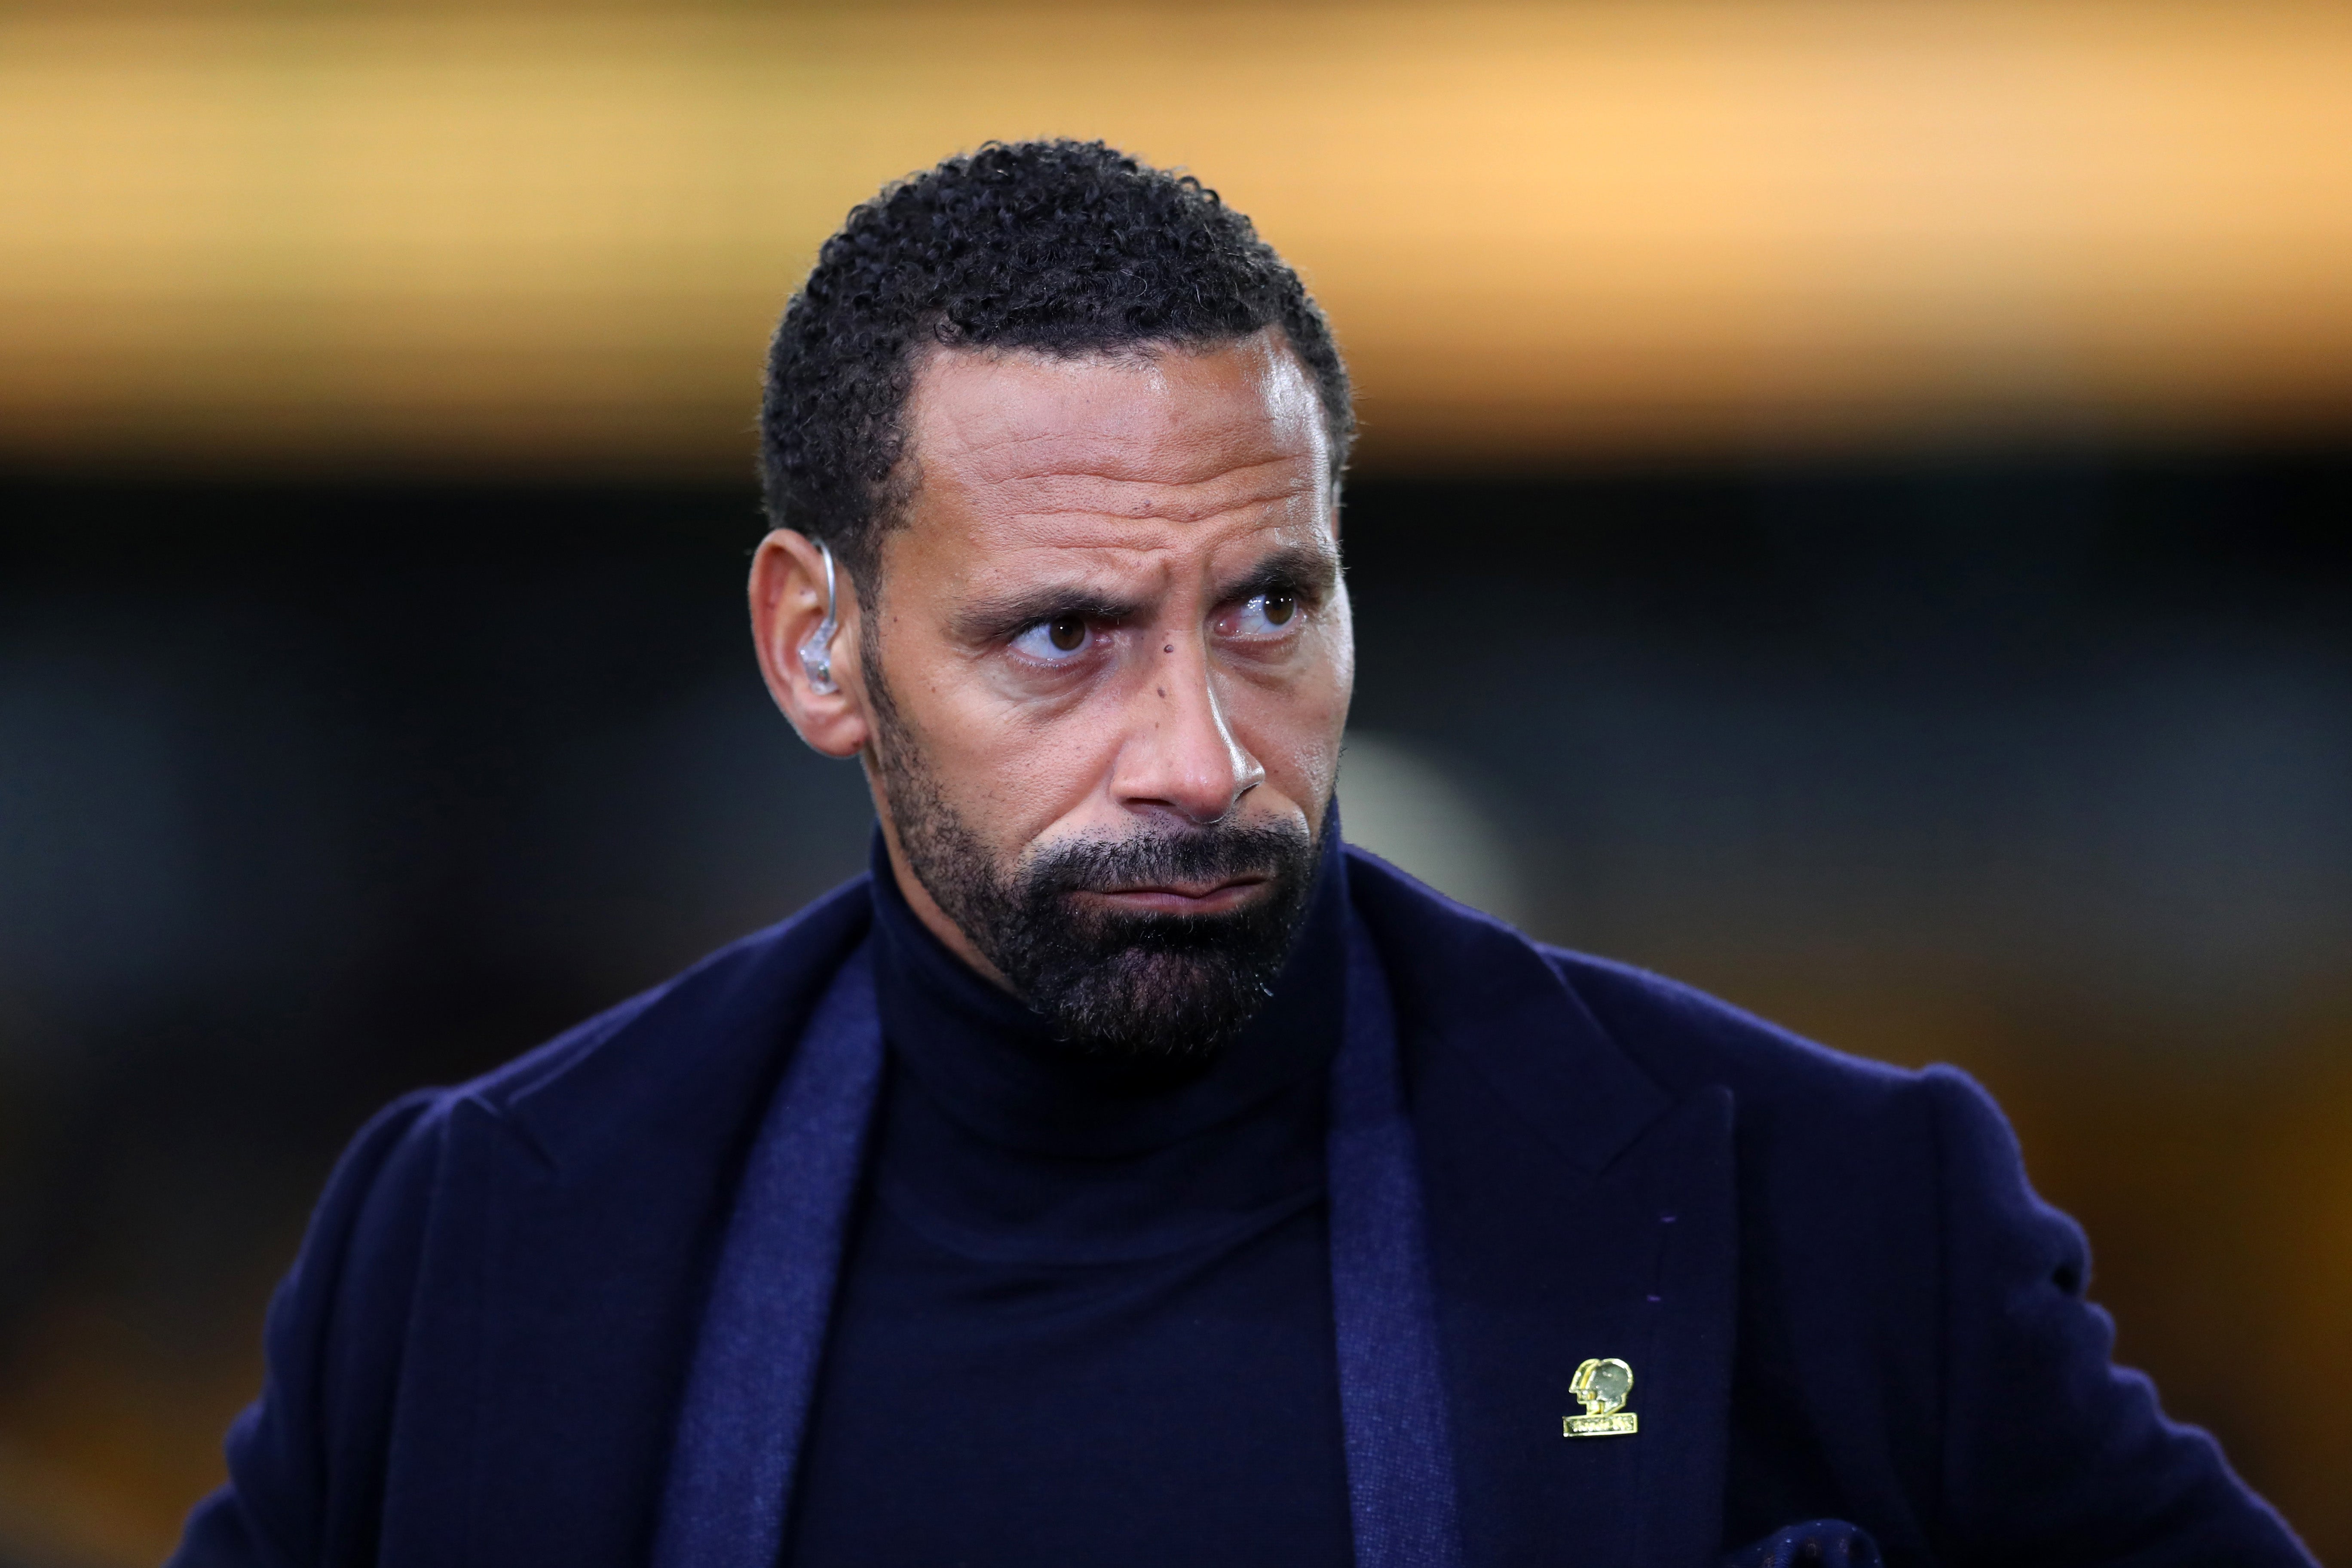 Rio Ferdinand says the Premier League champions look ‘head and shoulders’ above their rivals